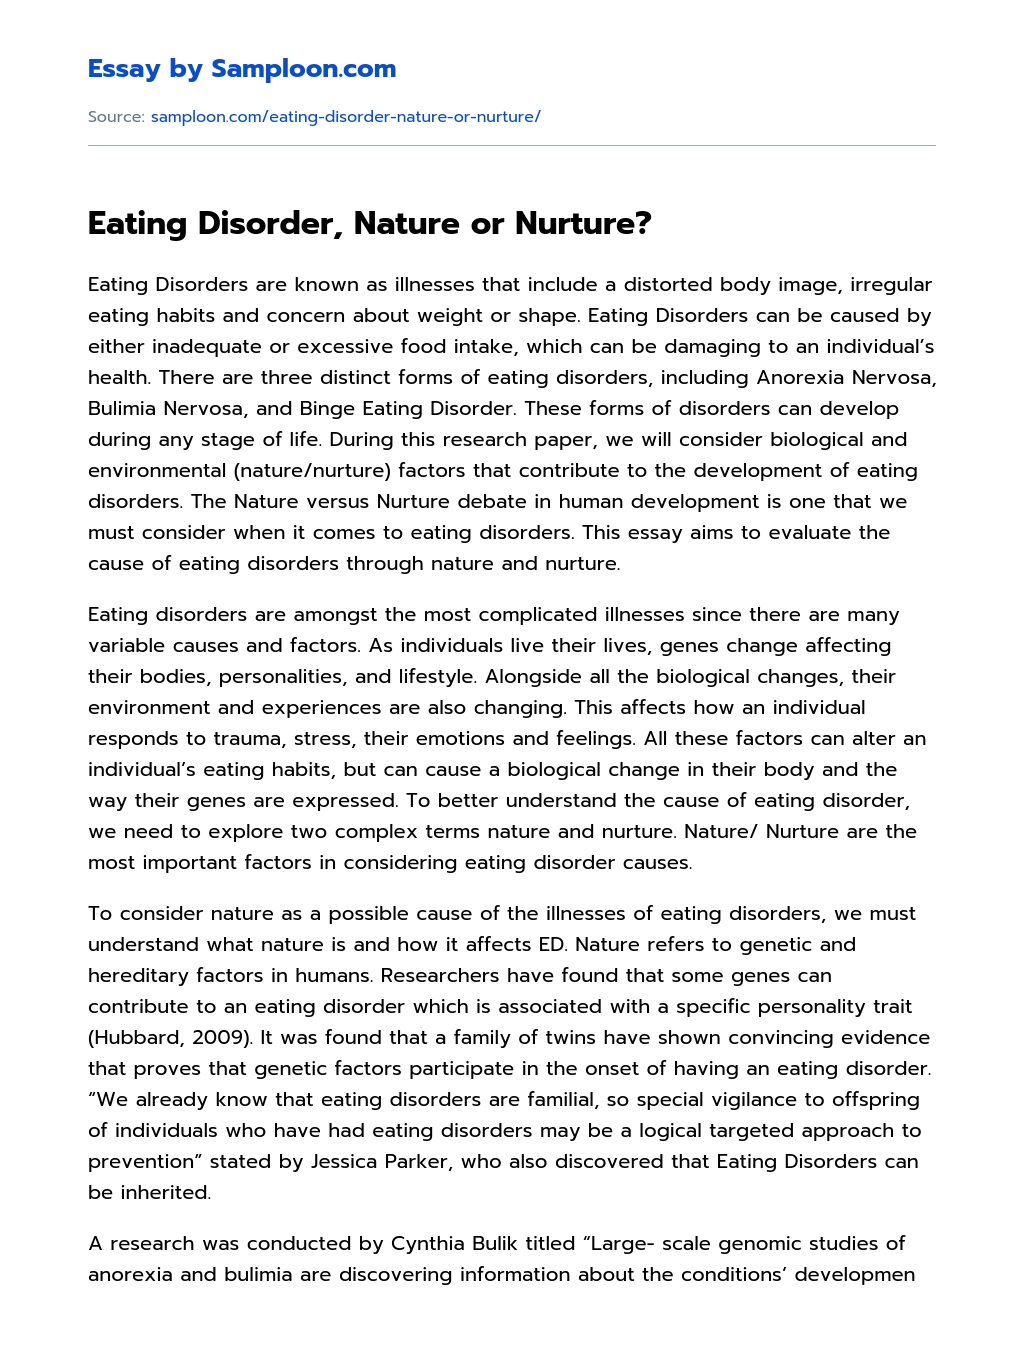 Eating Disorder, Nature or Nurture? Research Paper essay